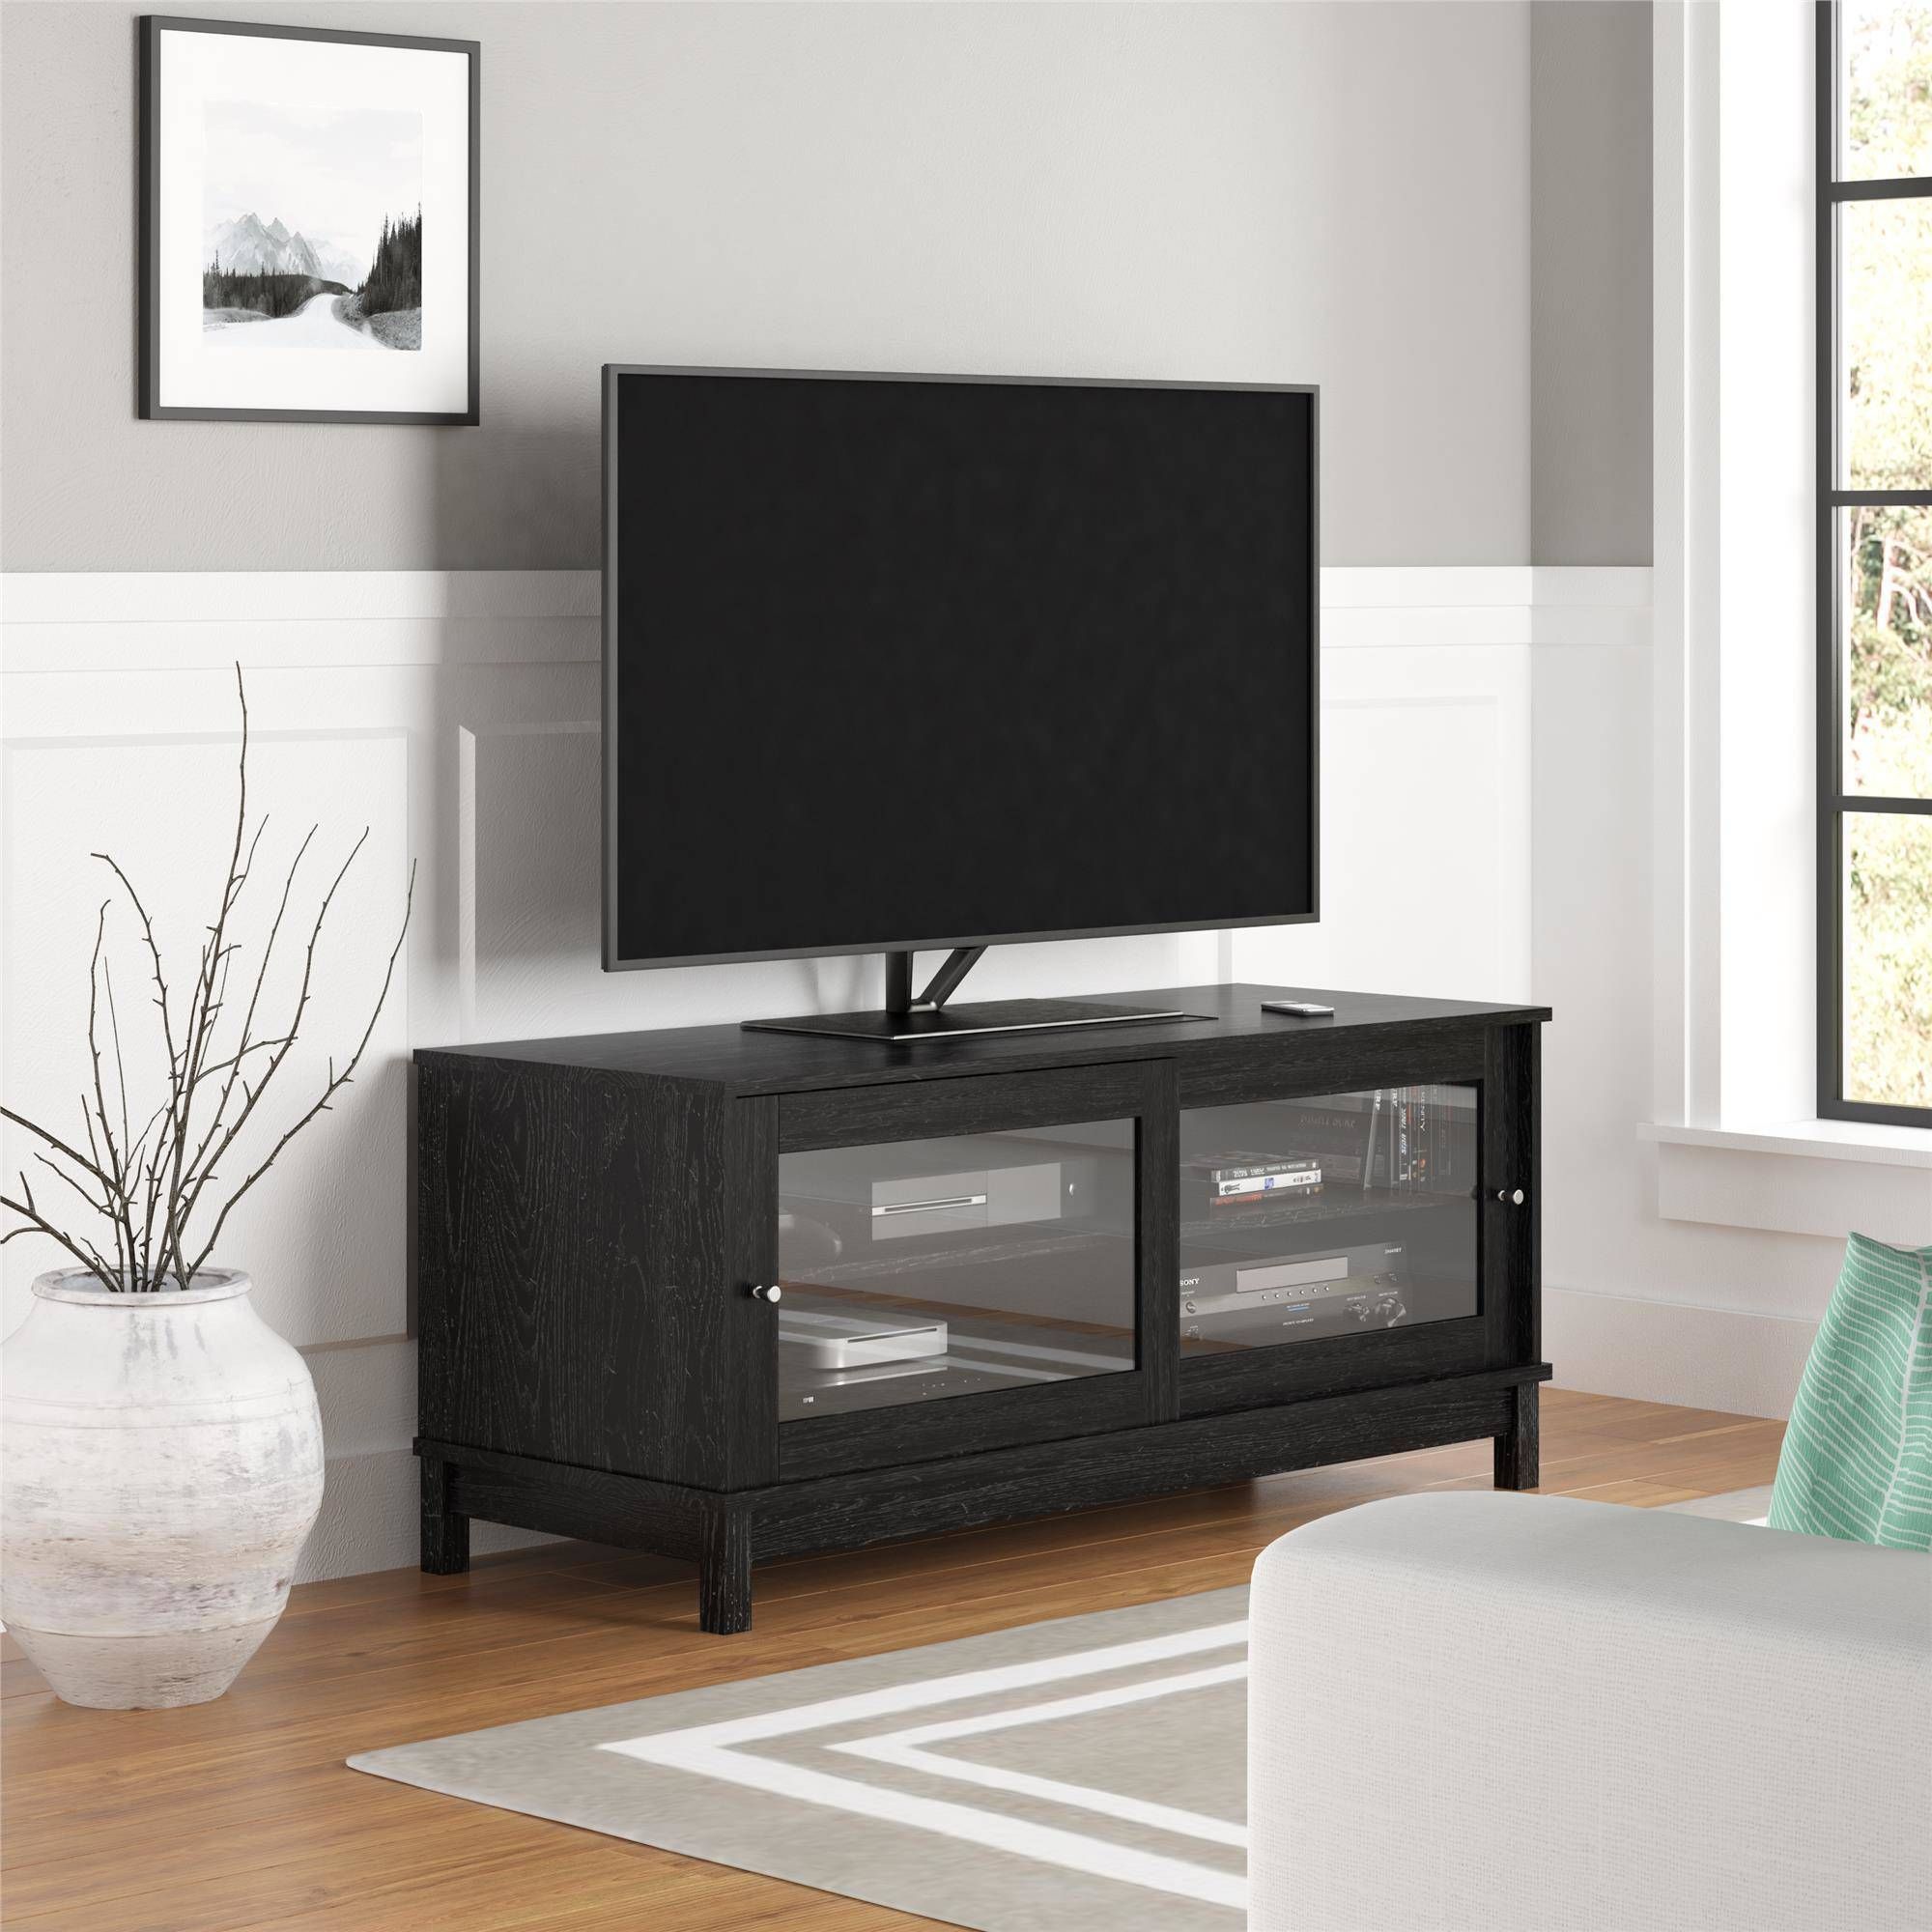 Home Entertainment Center Tv Stand Media Storage With For Modern Sliding Door Tv Stands (View 11 of 15)